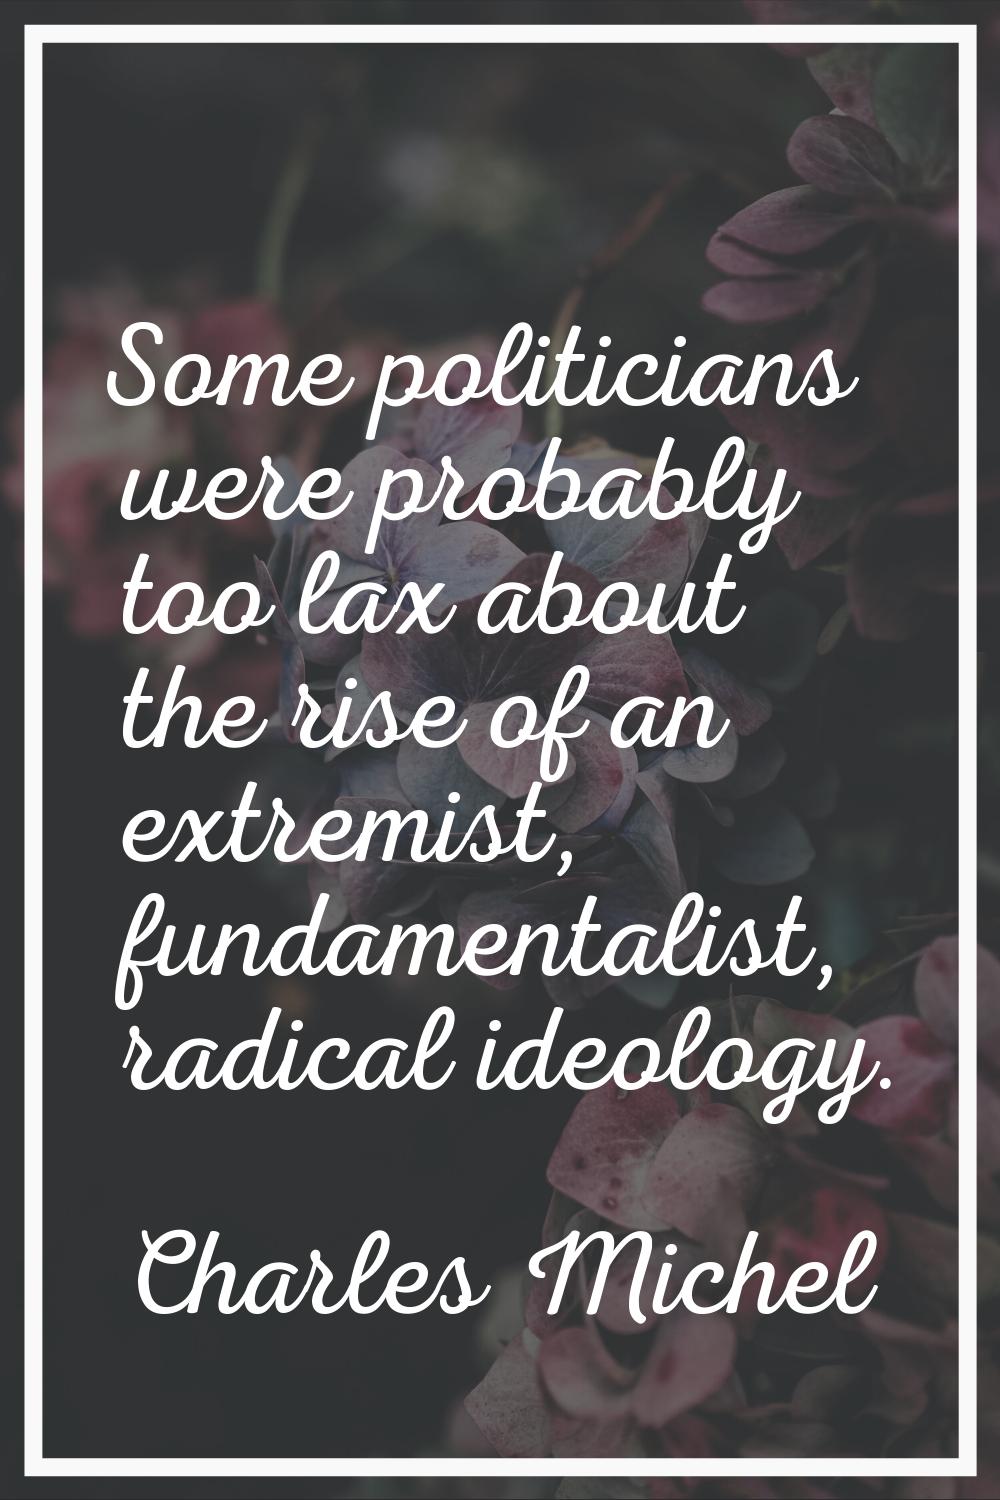 Some politicians were probably too lax about the rise of an extremist, fundamentalist, radical ideo